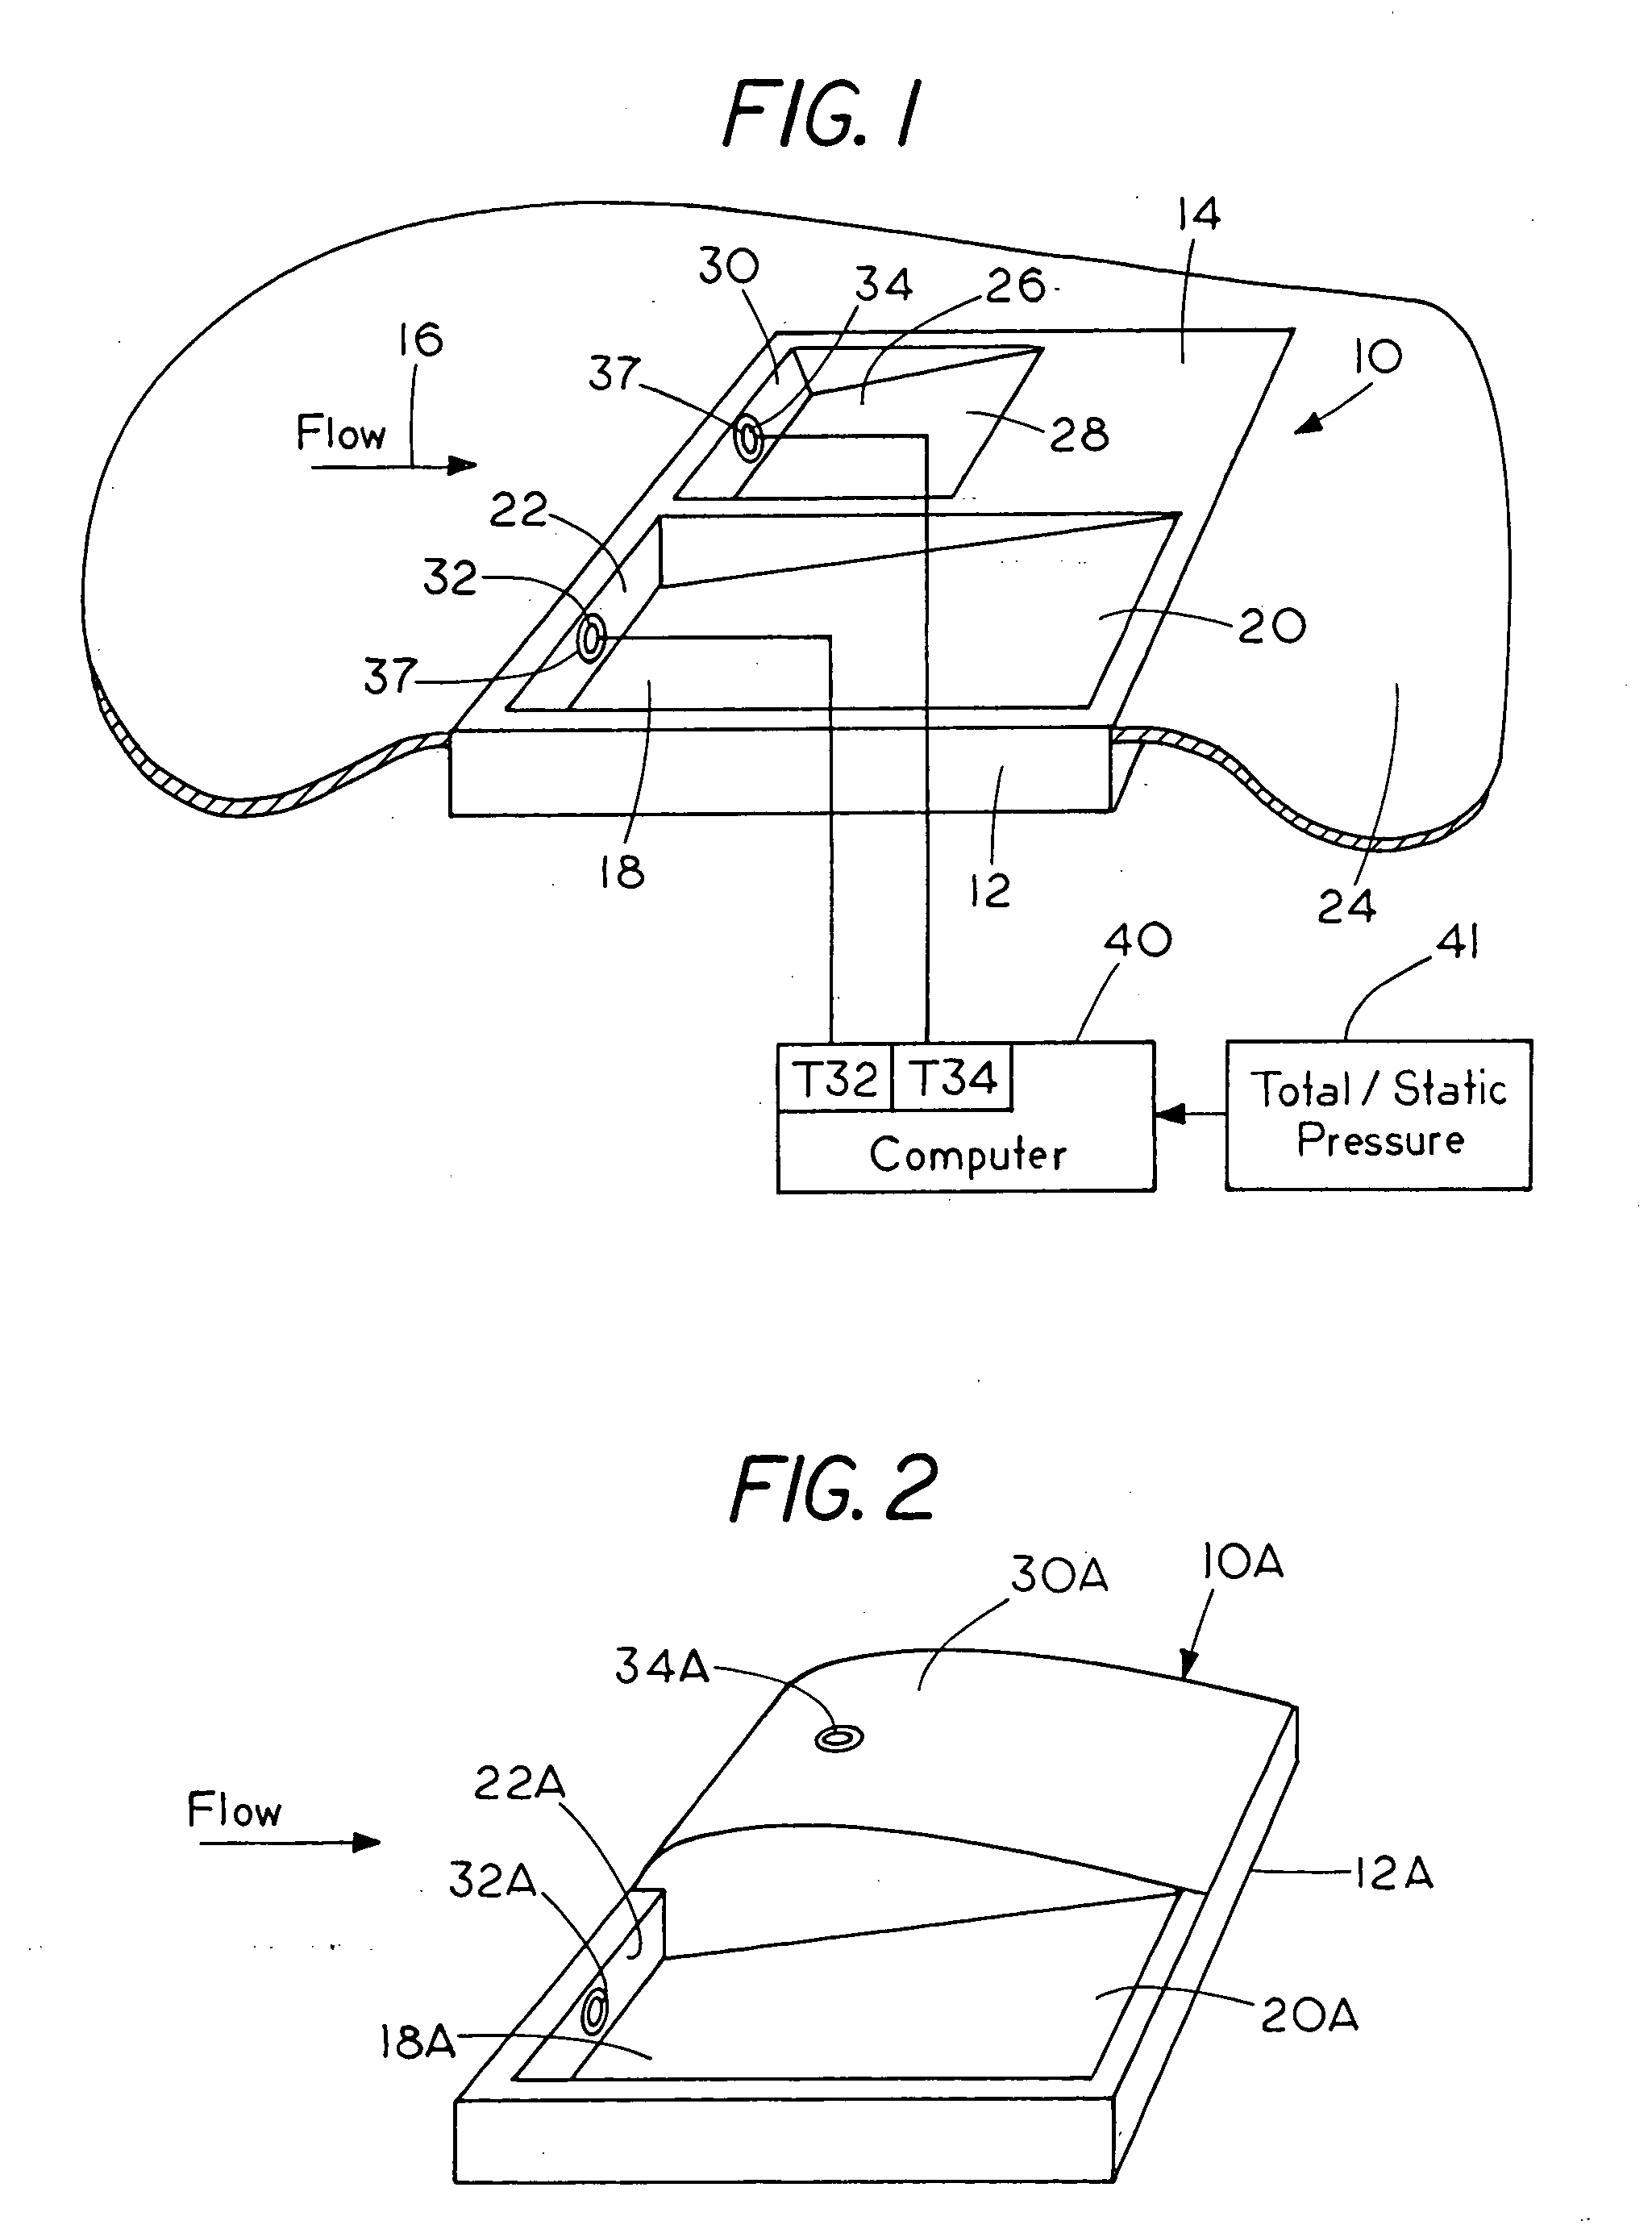 Sensor assembly for determining total temperature, static temperature and mach number